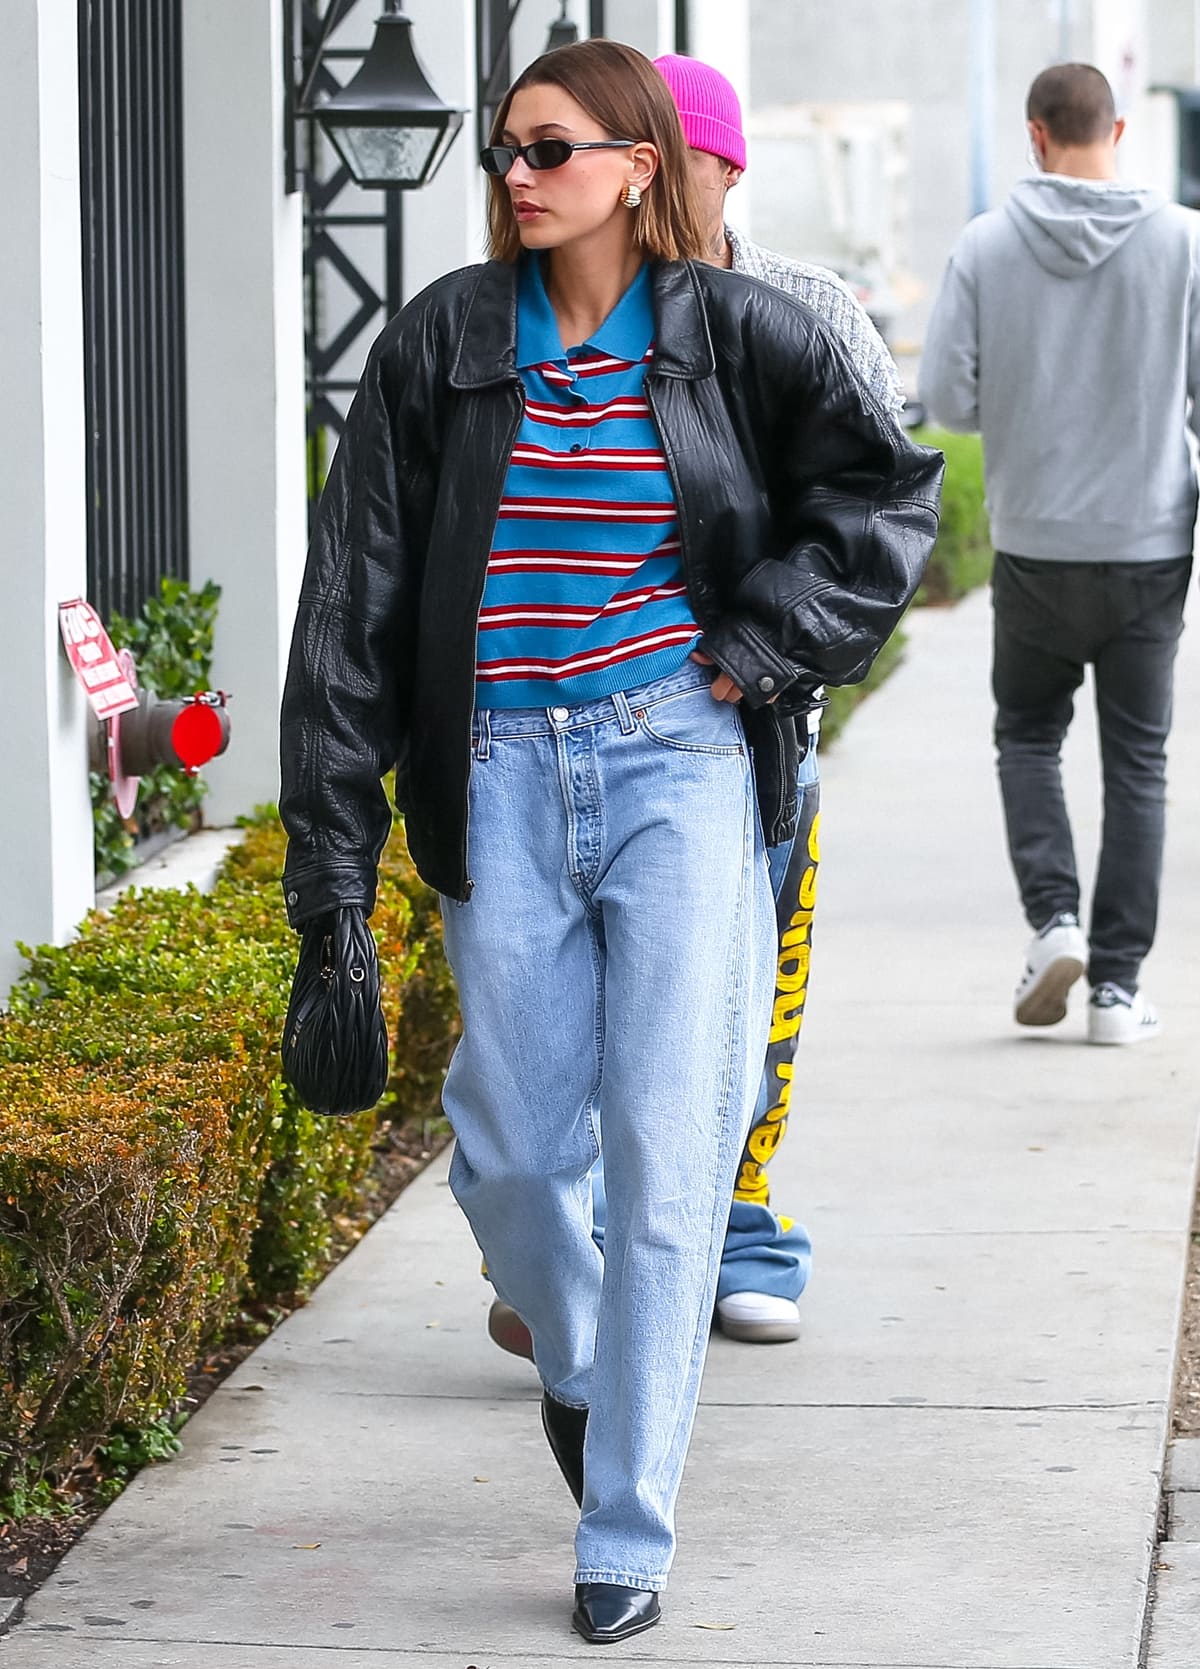 Hailey Bieber kept it casual in a blue striped Loewe pullover paired with loose-fitting vintage Levi's jeans for a comfortable yet stylish look